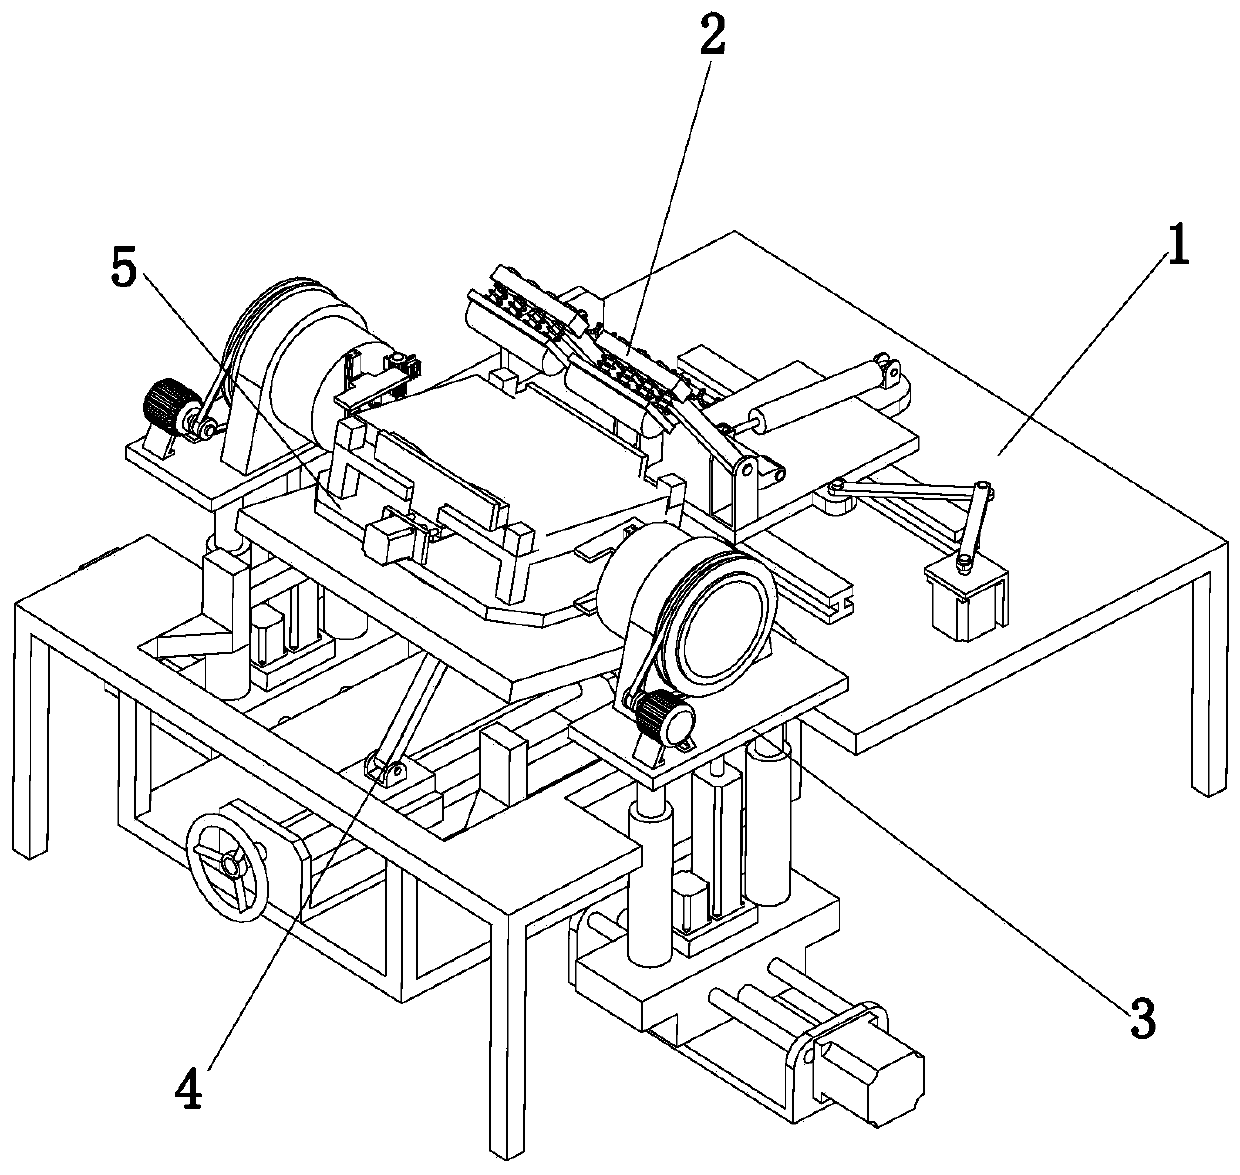 A steel tempering and forming device for iron and steel production